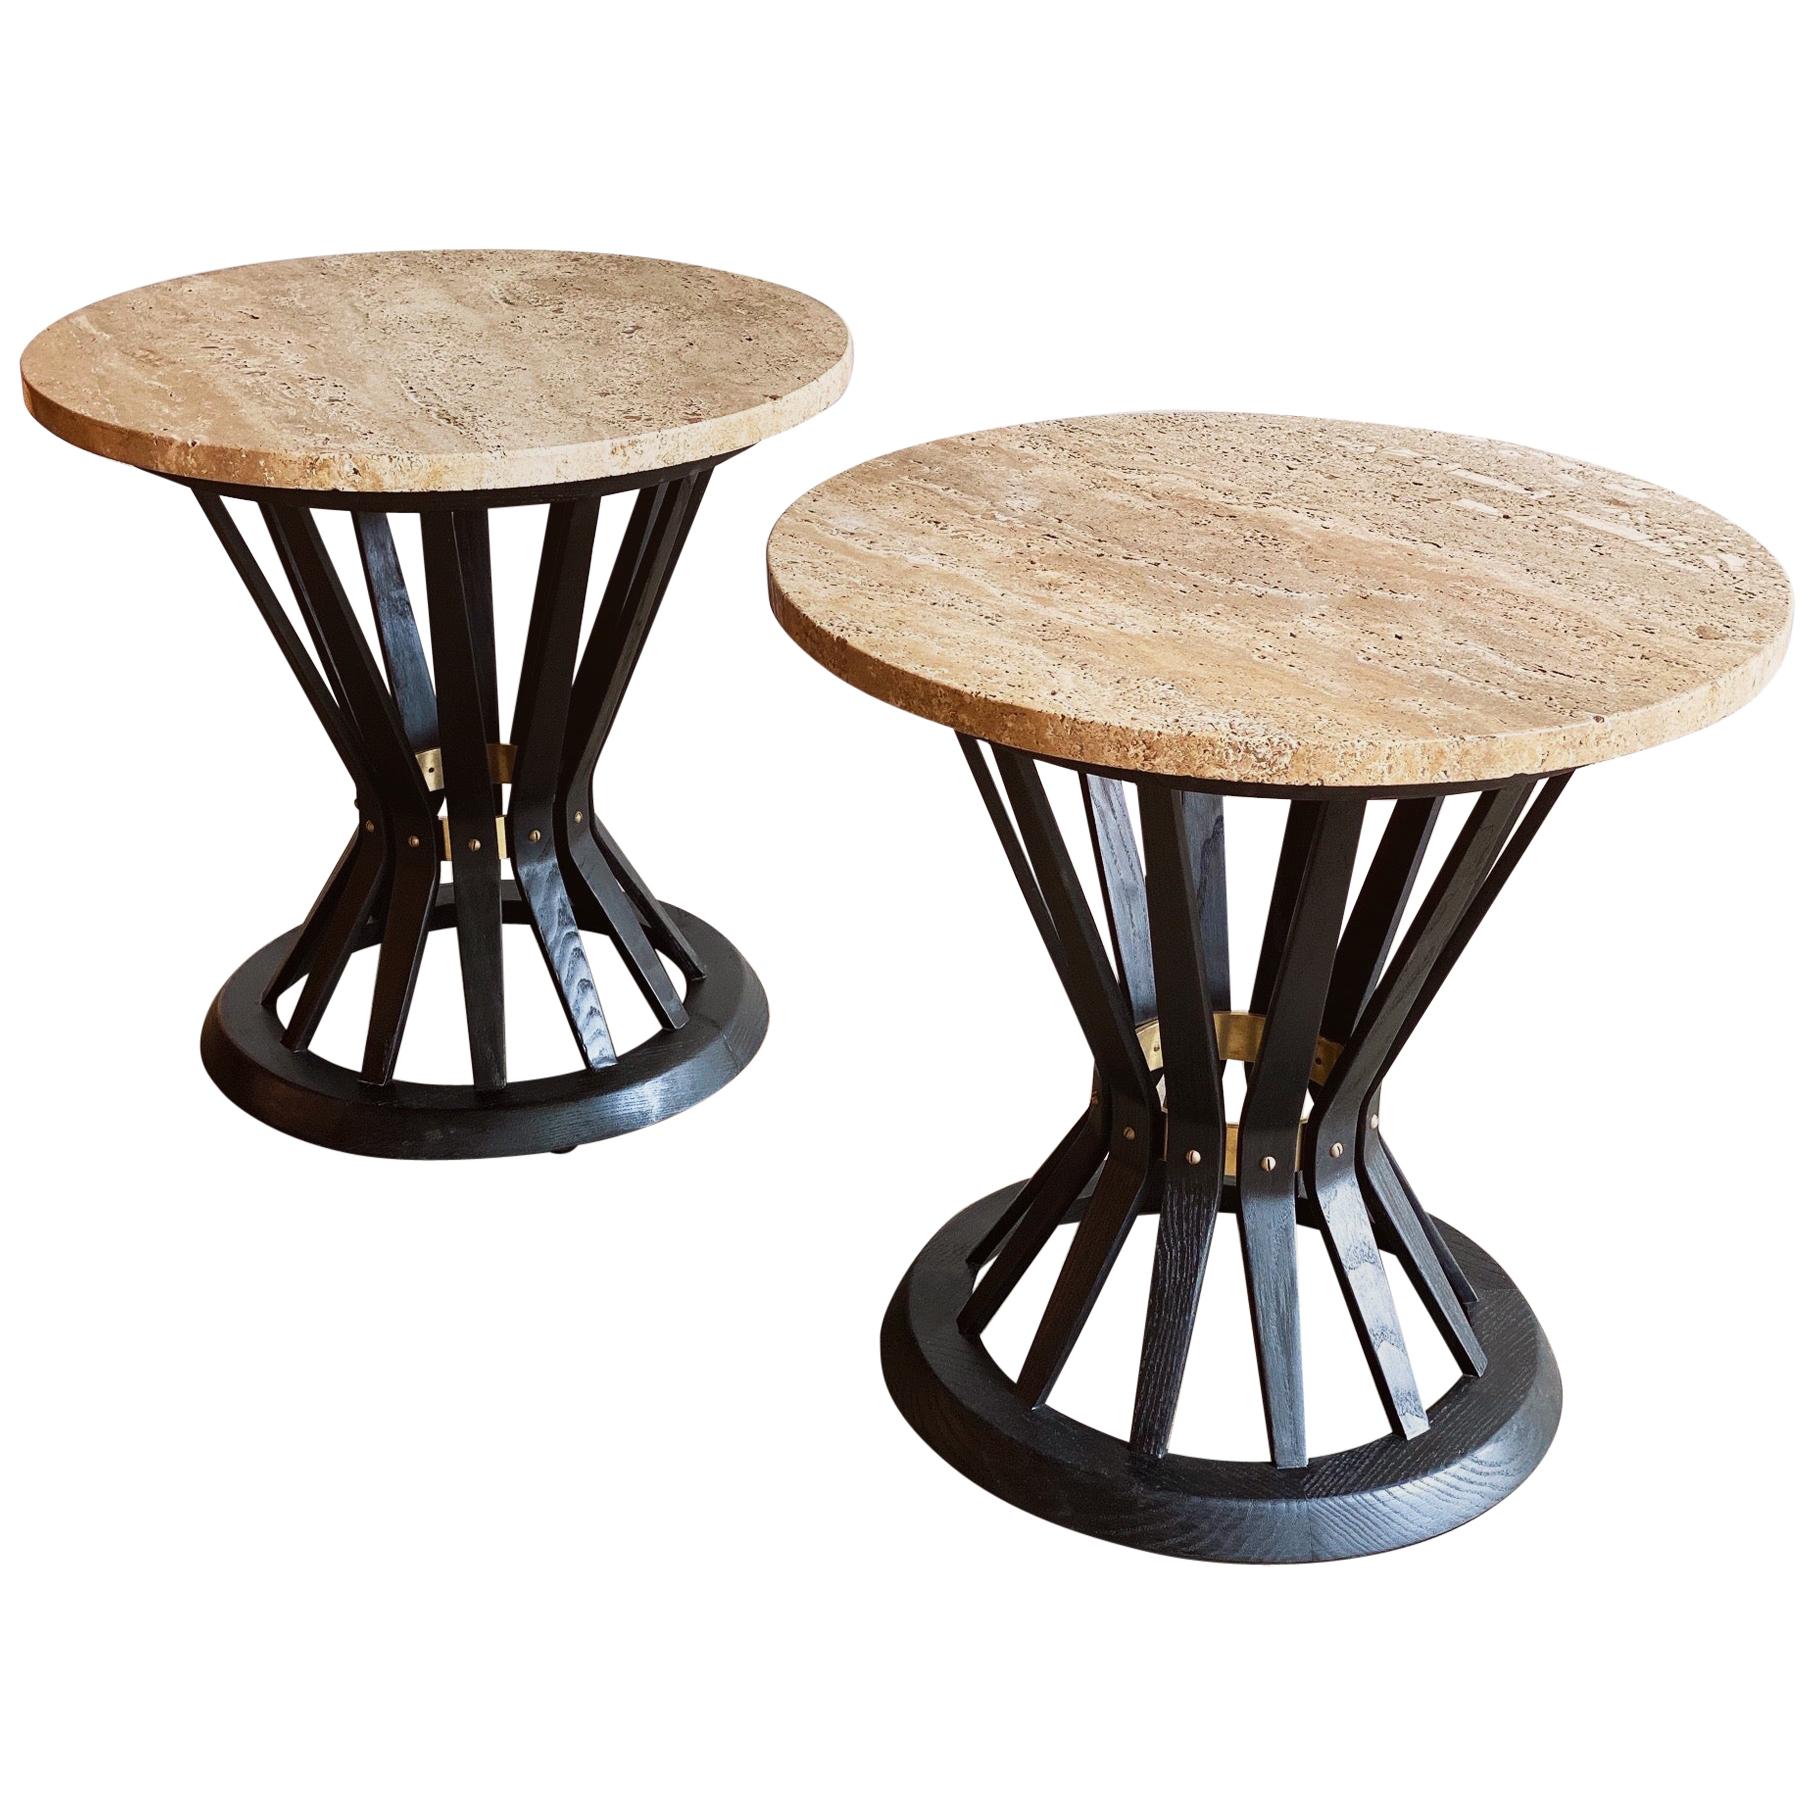 Pair of Round Travertine Tables by Edward Wormley for Dunbar Furniture Corp.